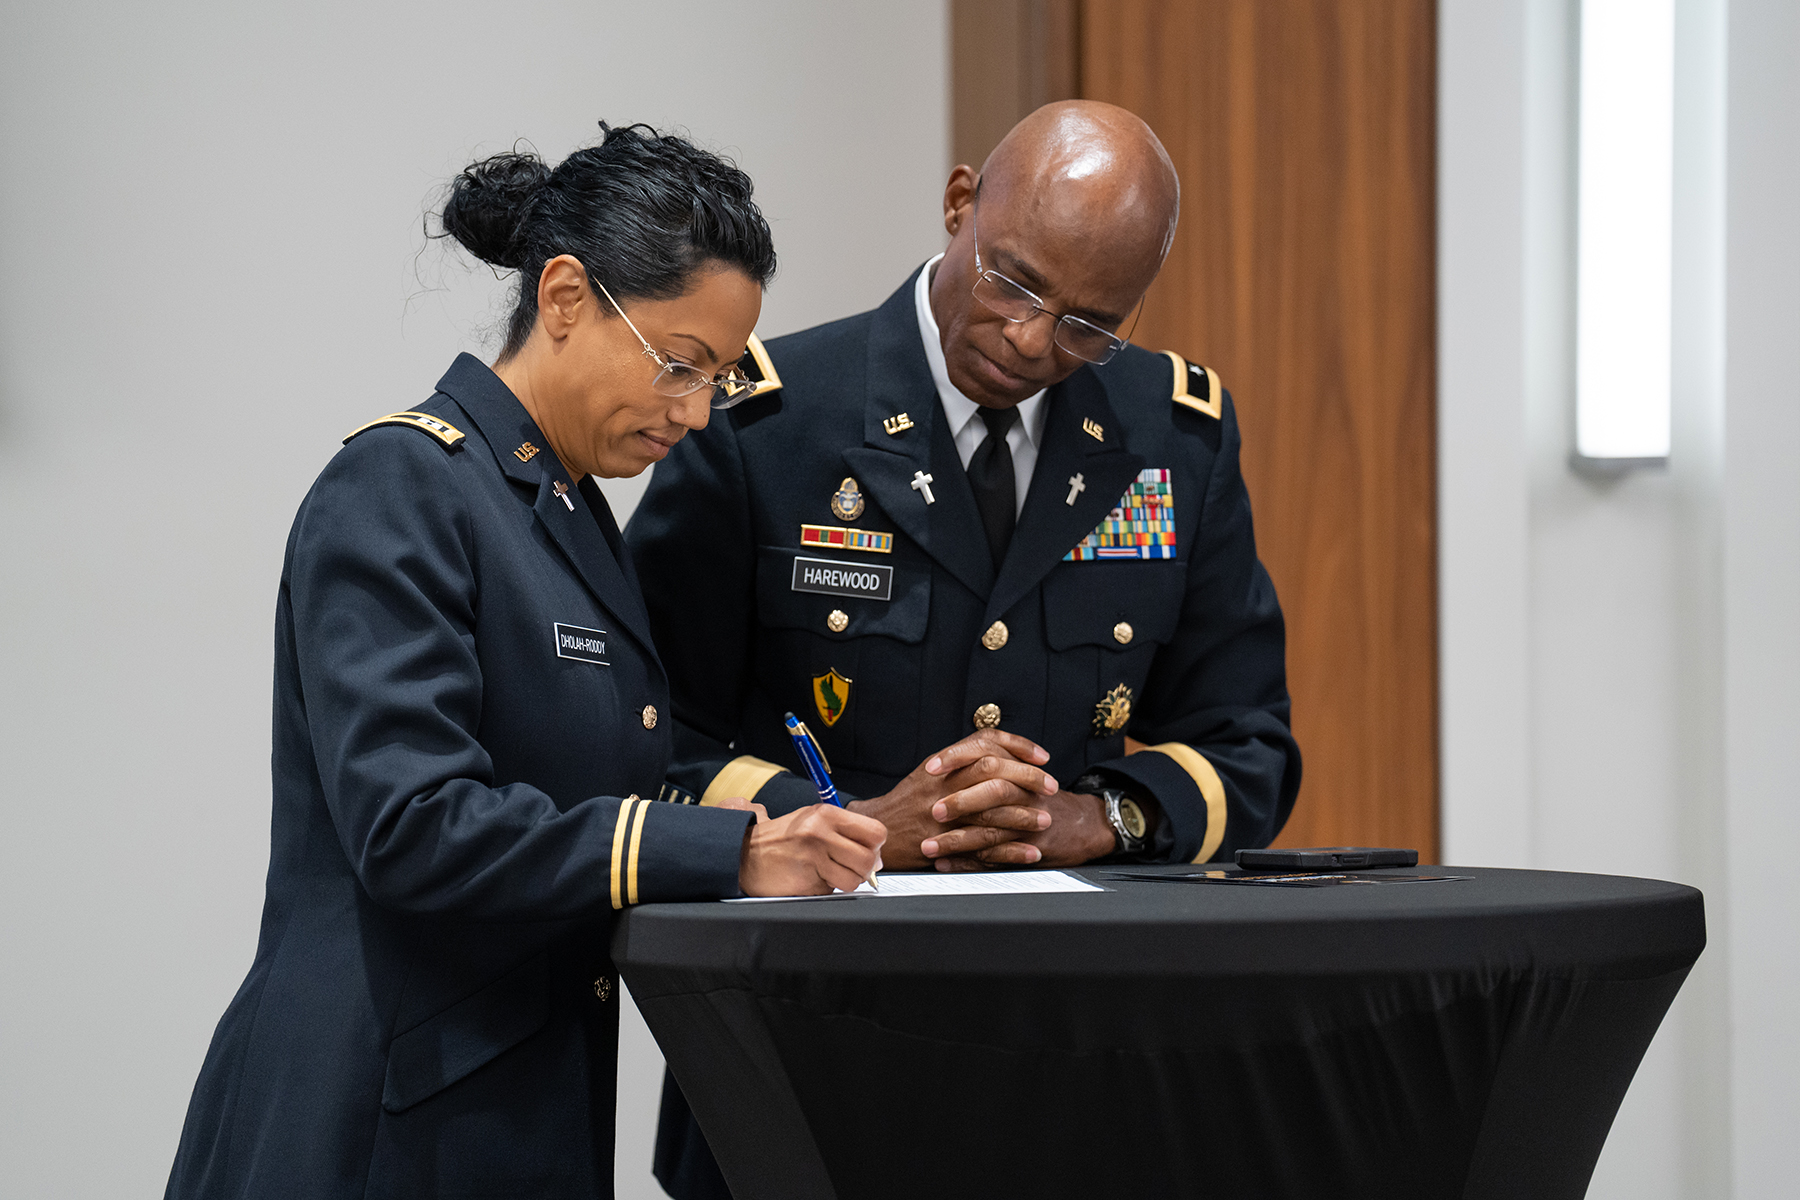 A lady with tanned skin in military uniform signs a paper as a black man, also in uniform, watches.